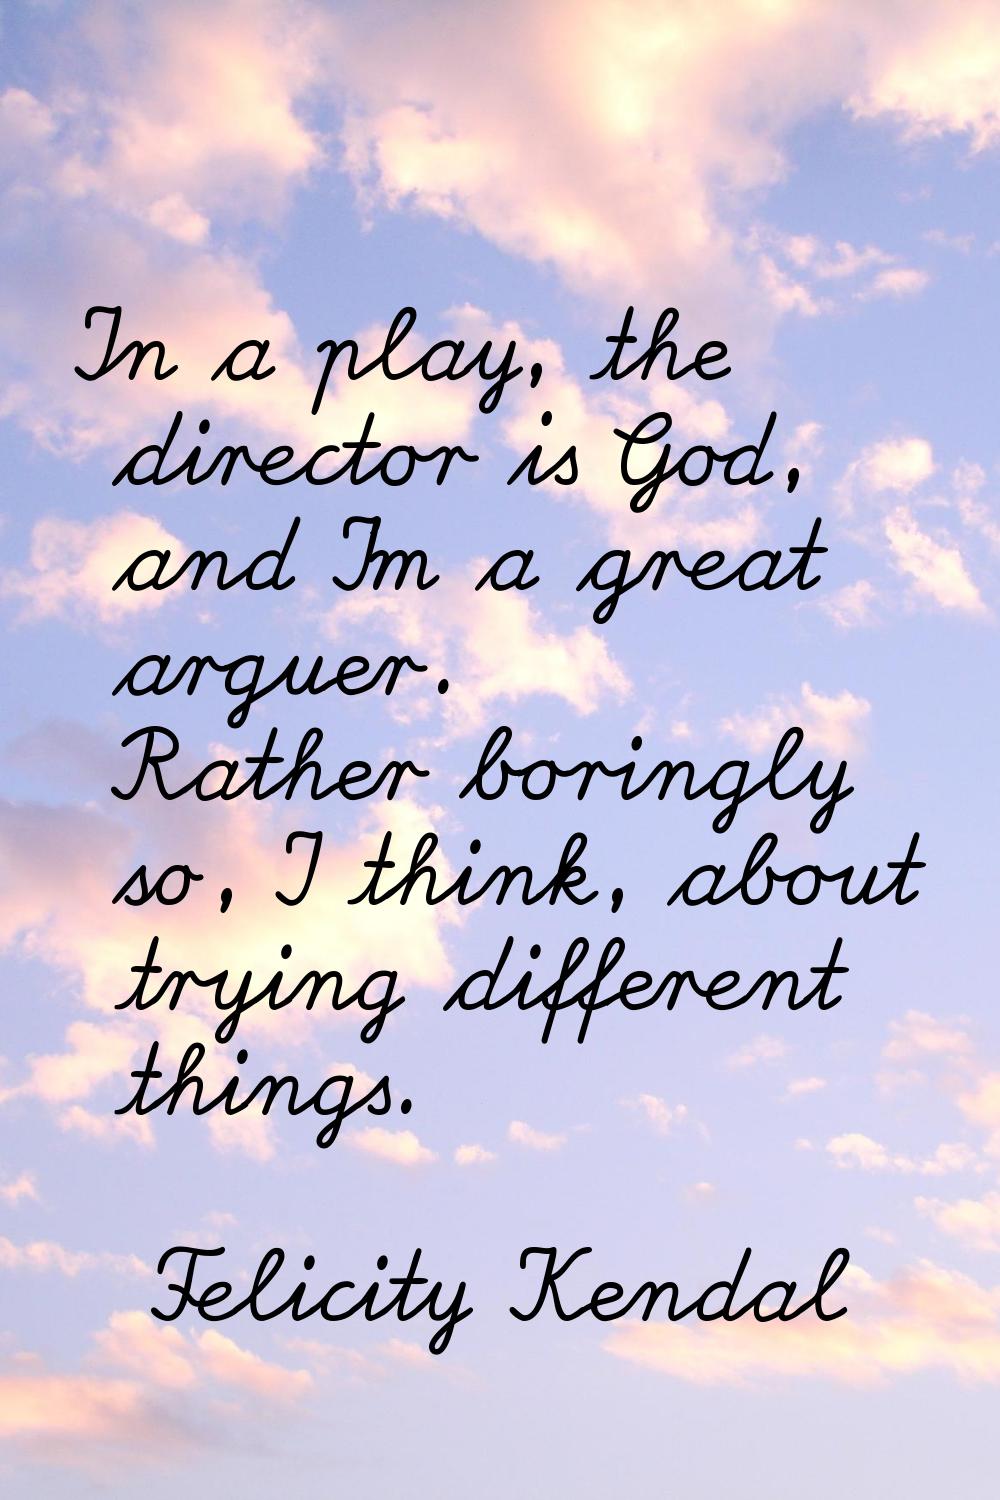 In a play, the director is God, and I'm a great arguer. Rather boringly so, I think, about trying d